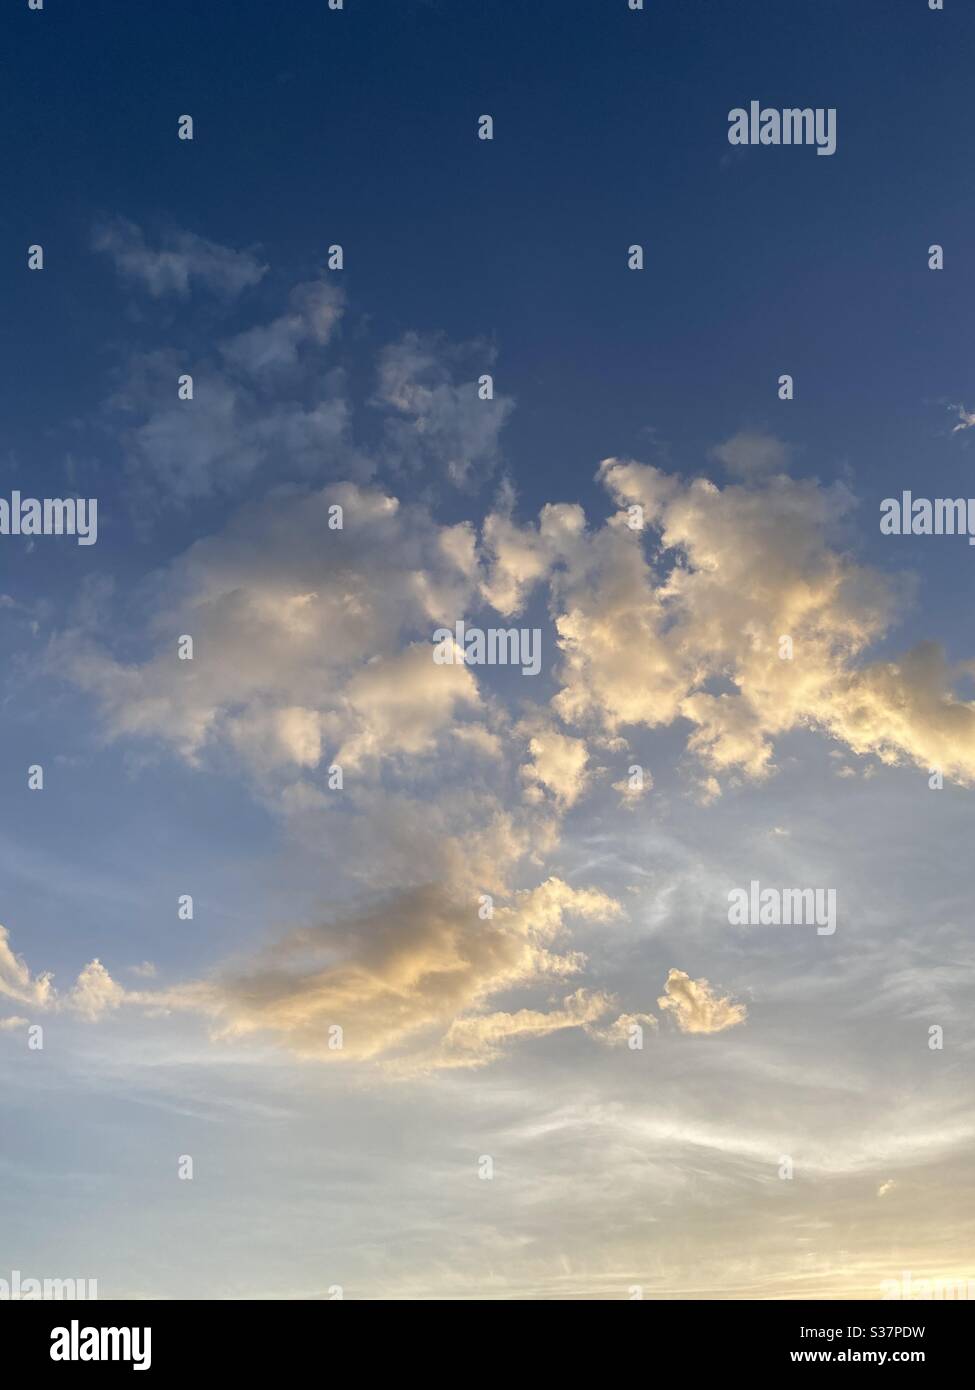 Sun lighting up white swirling clouds with blue skies Stock Photo